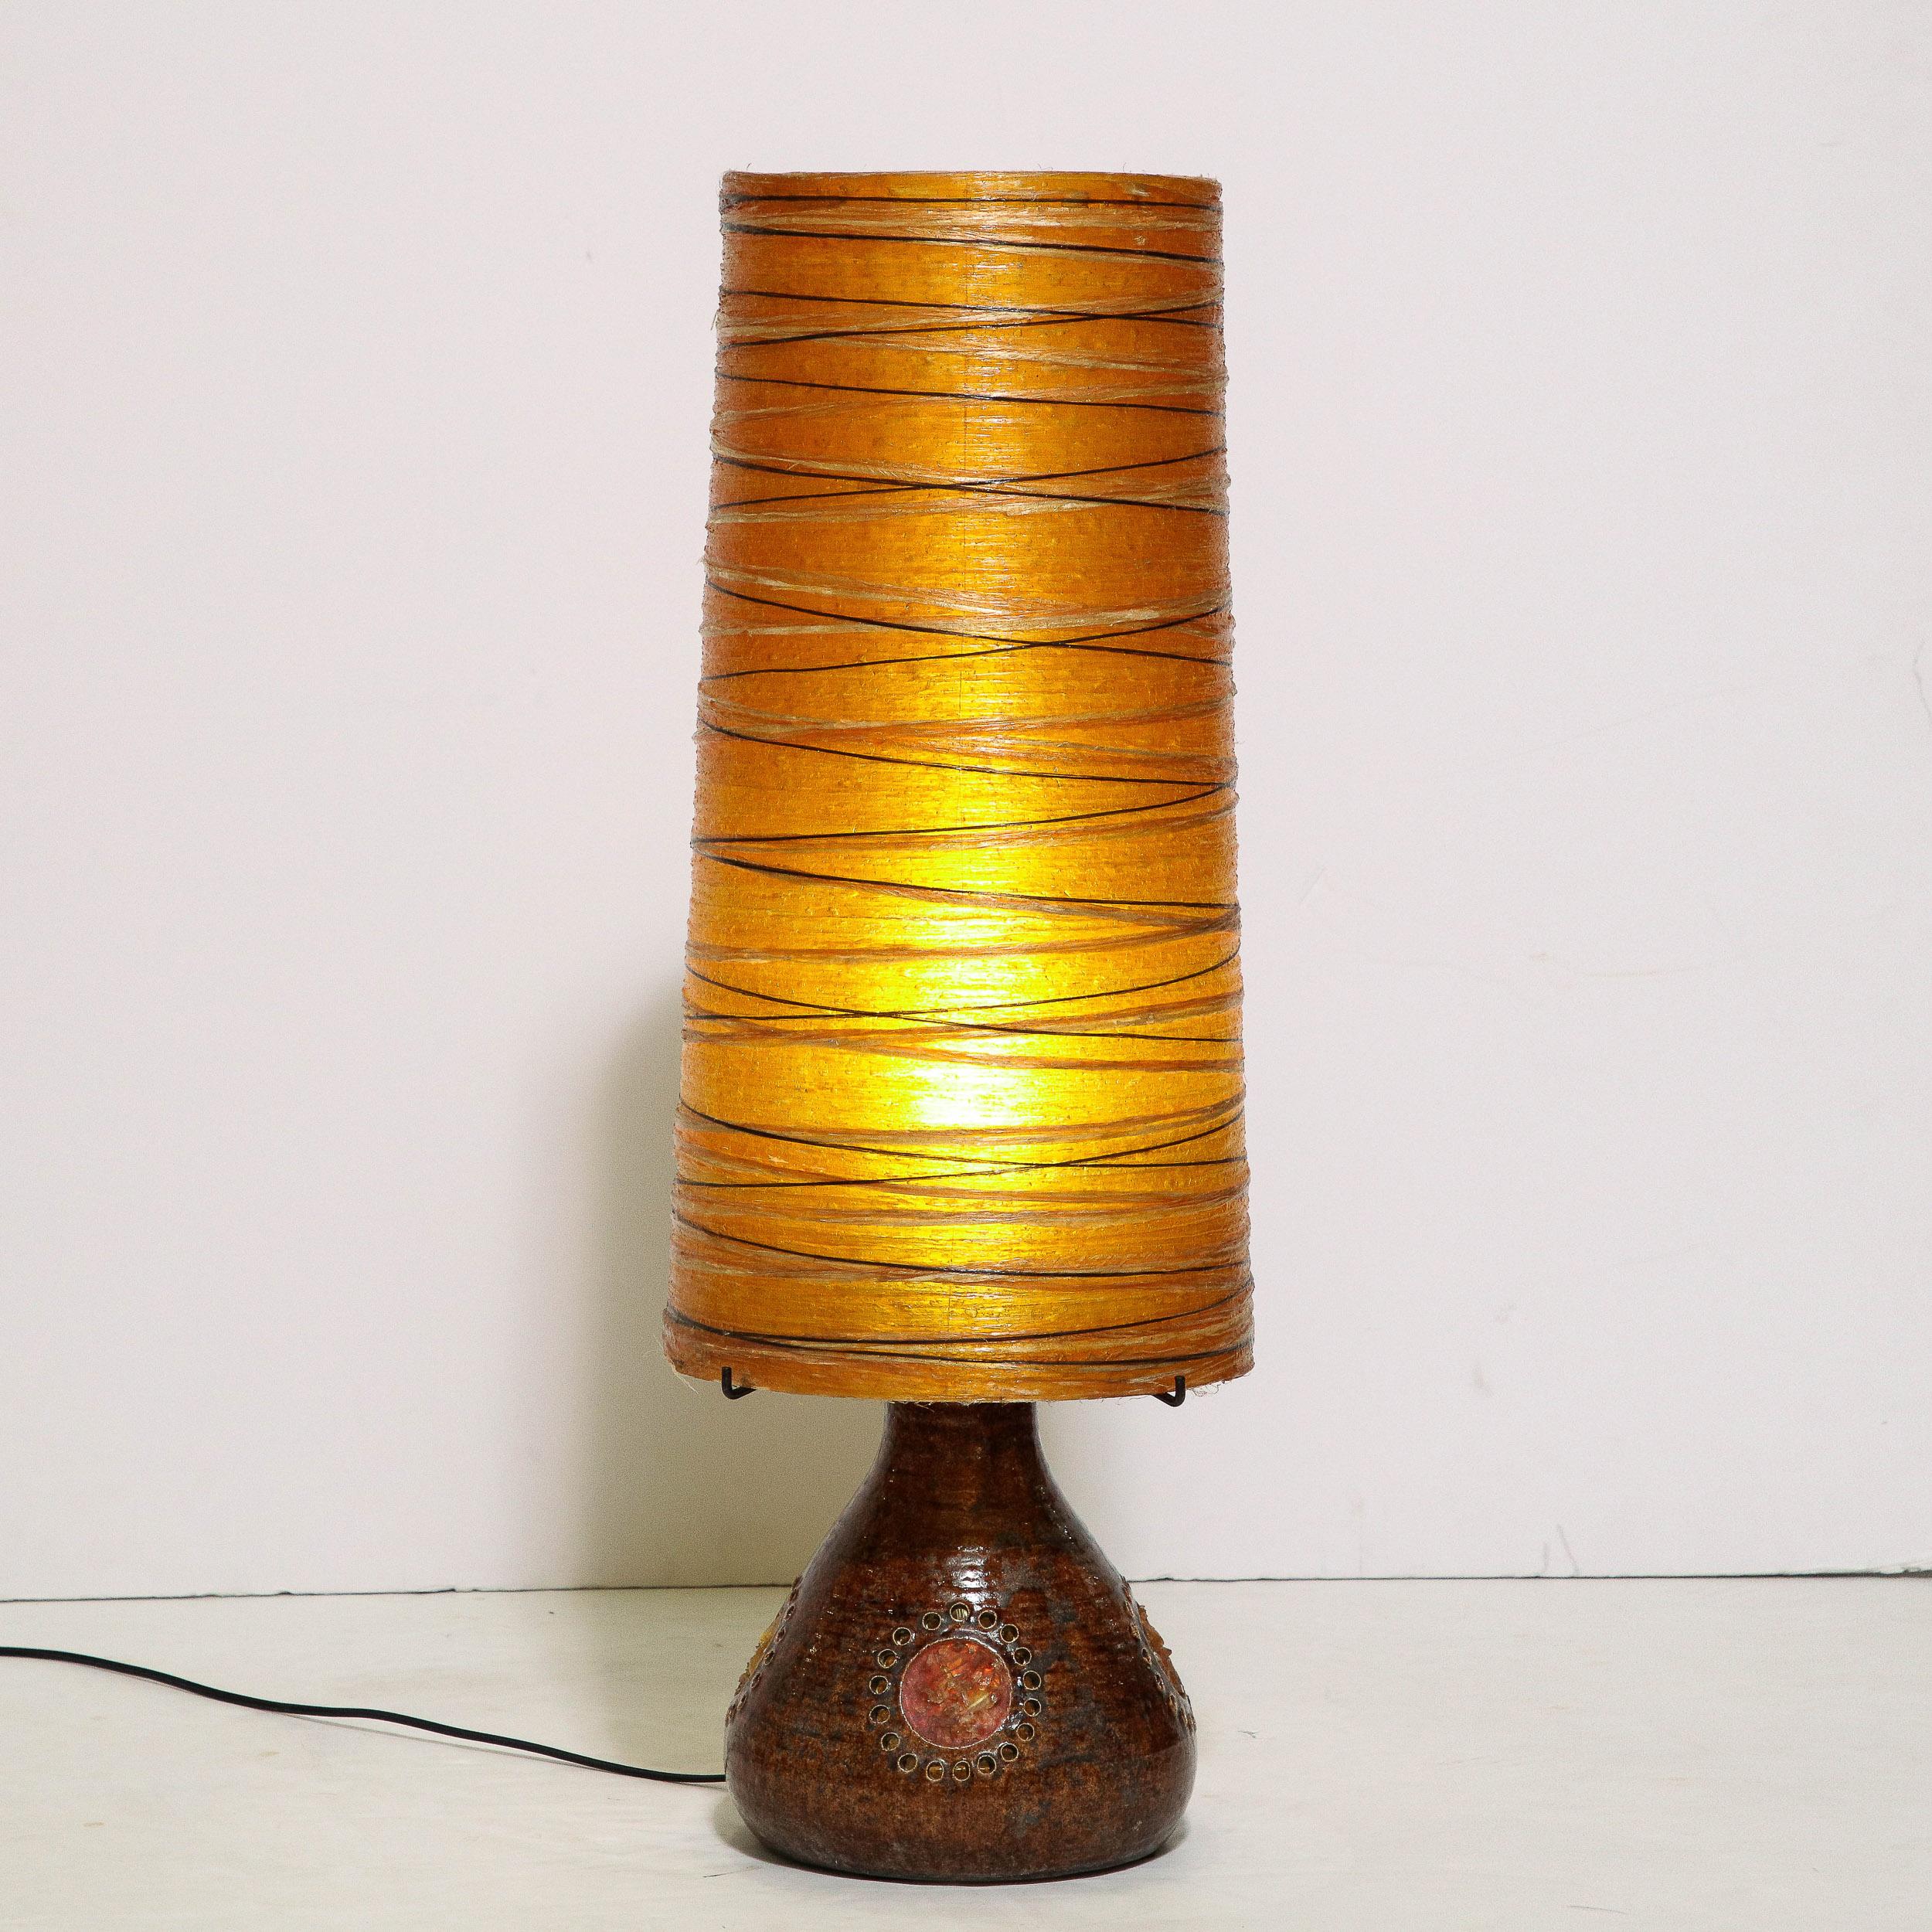 Midcentury Brutalist Ceramic Table Lamp with Horizontally Striated Resin Shade For Sale 1